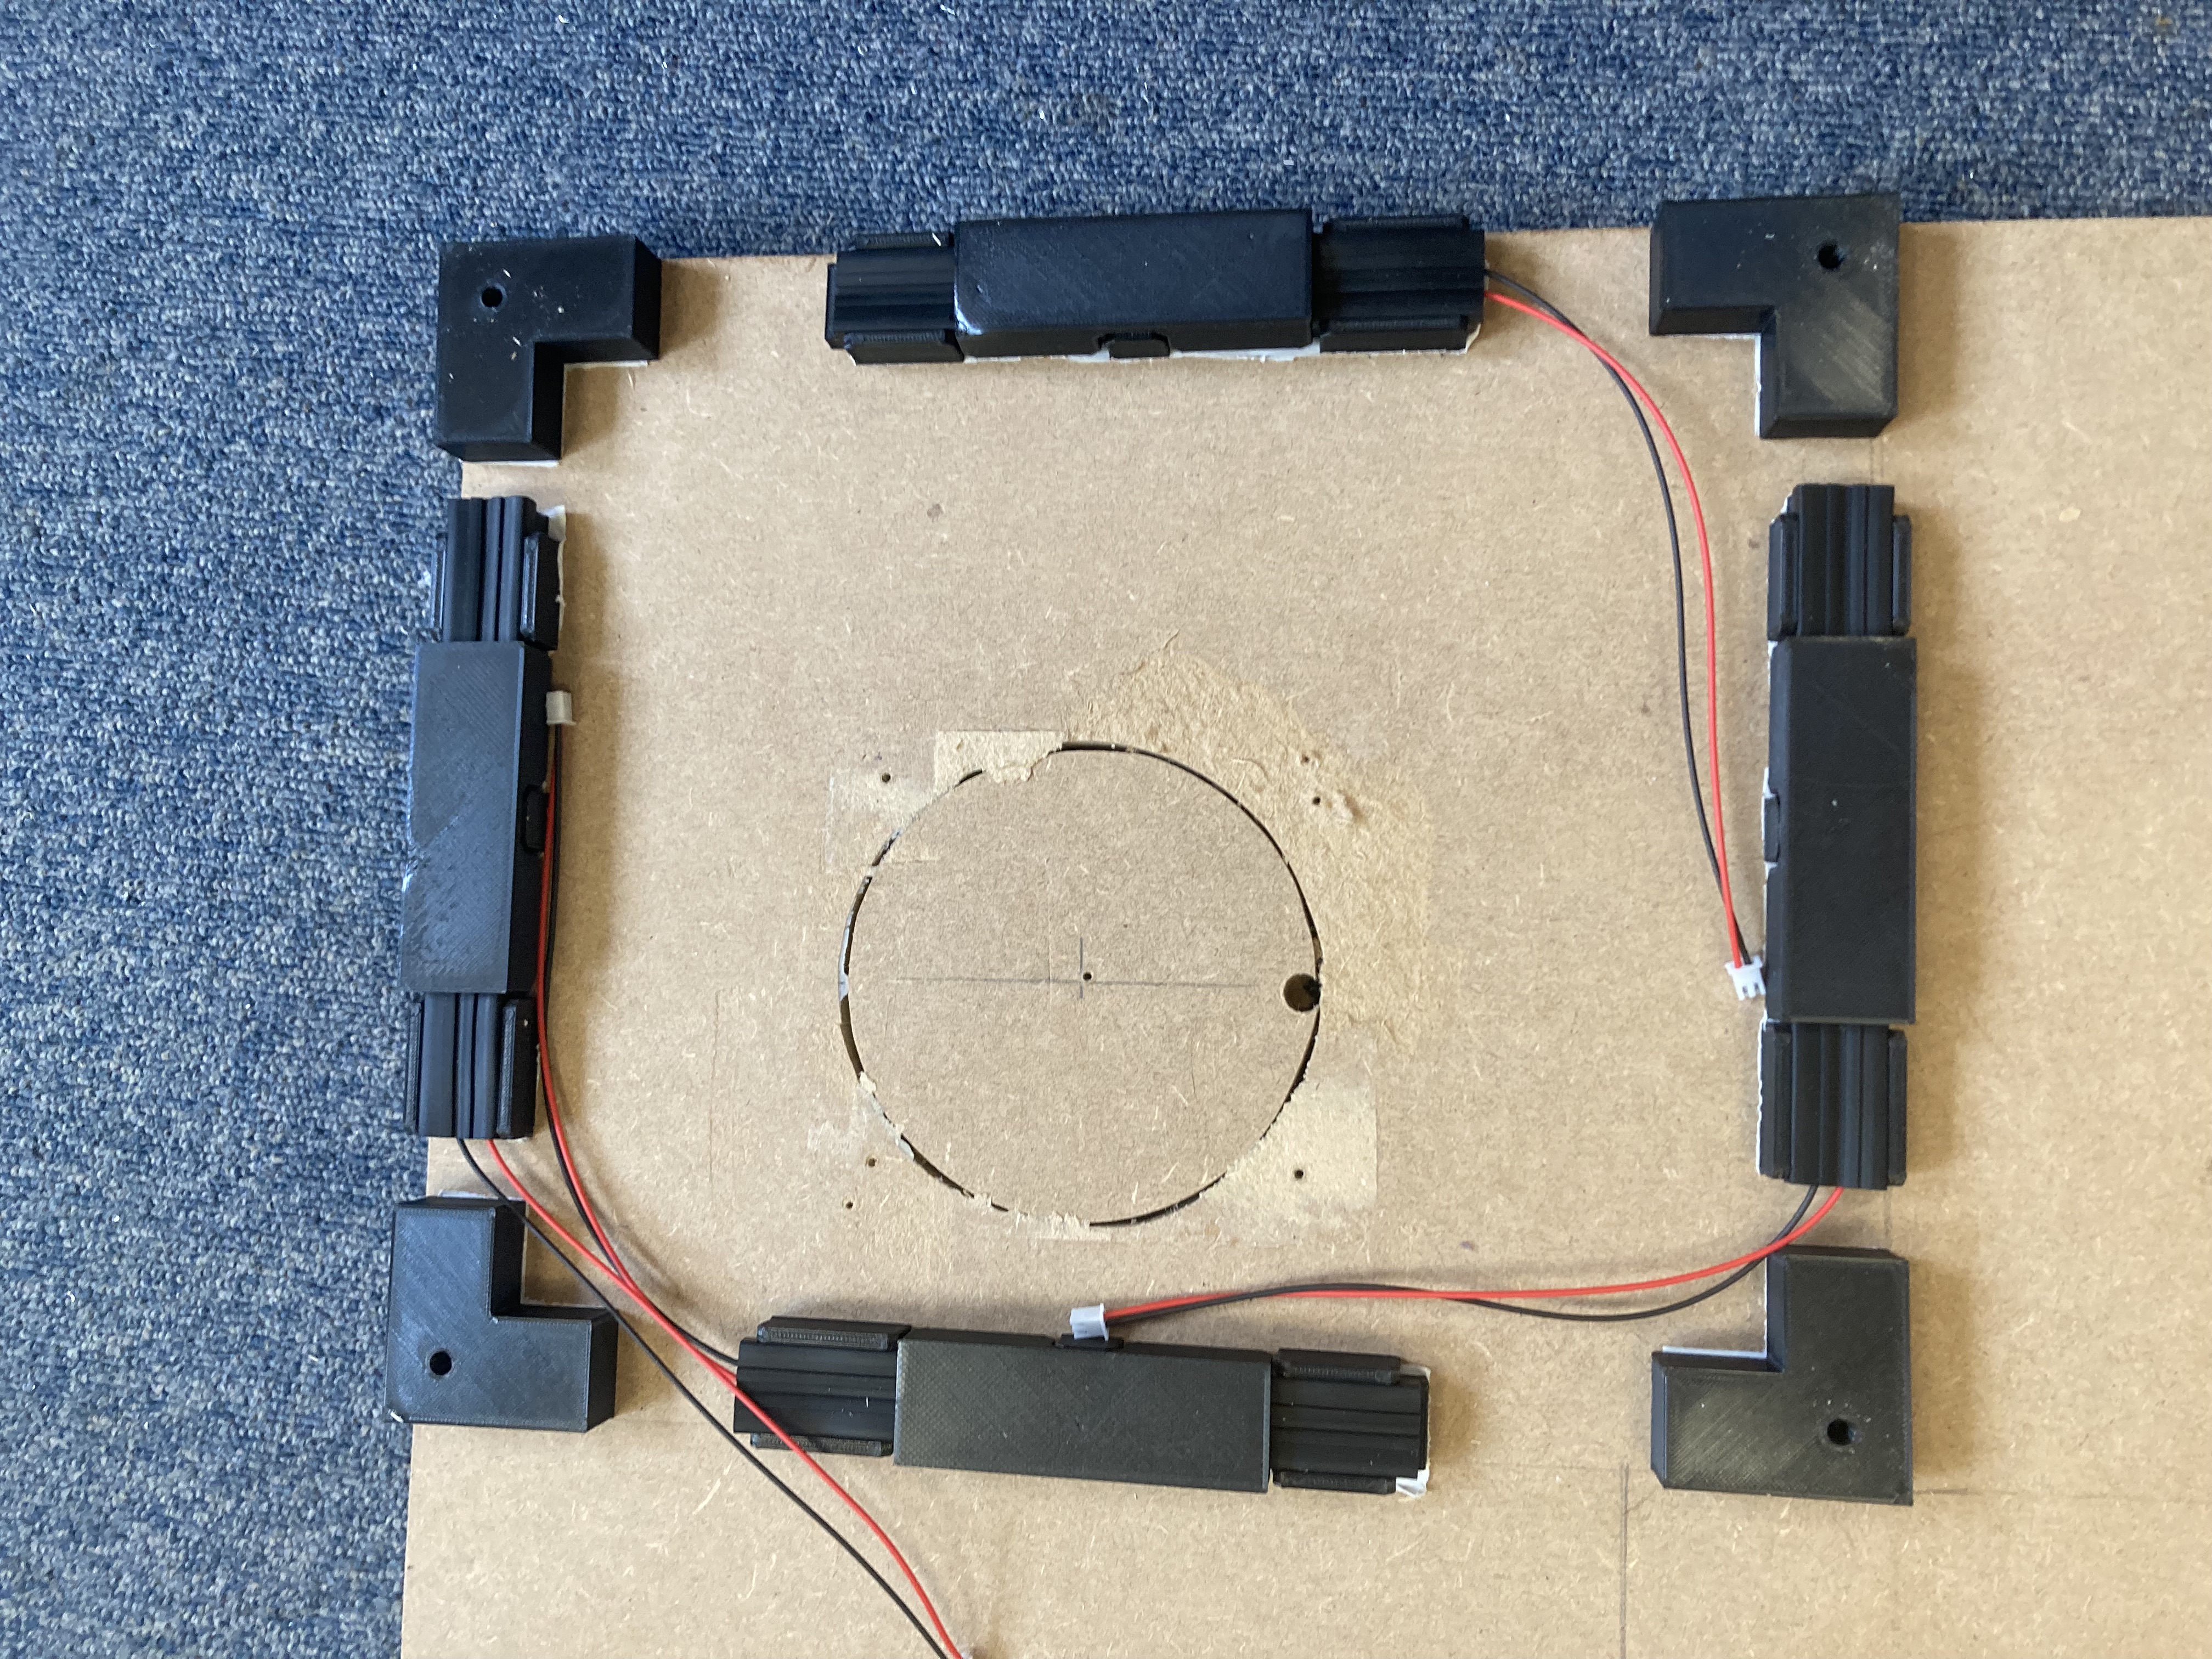 3d printed mounting hardware for the first panel, and sensors